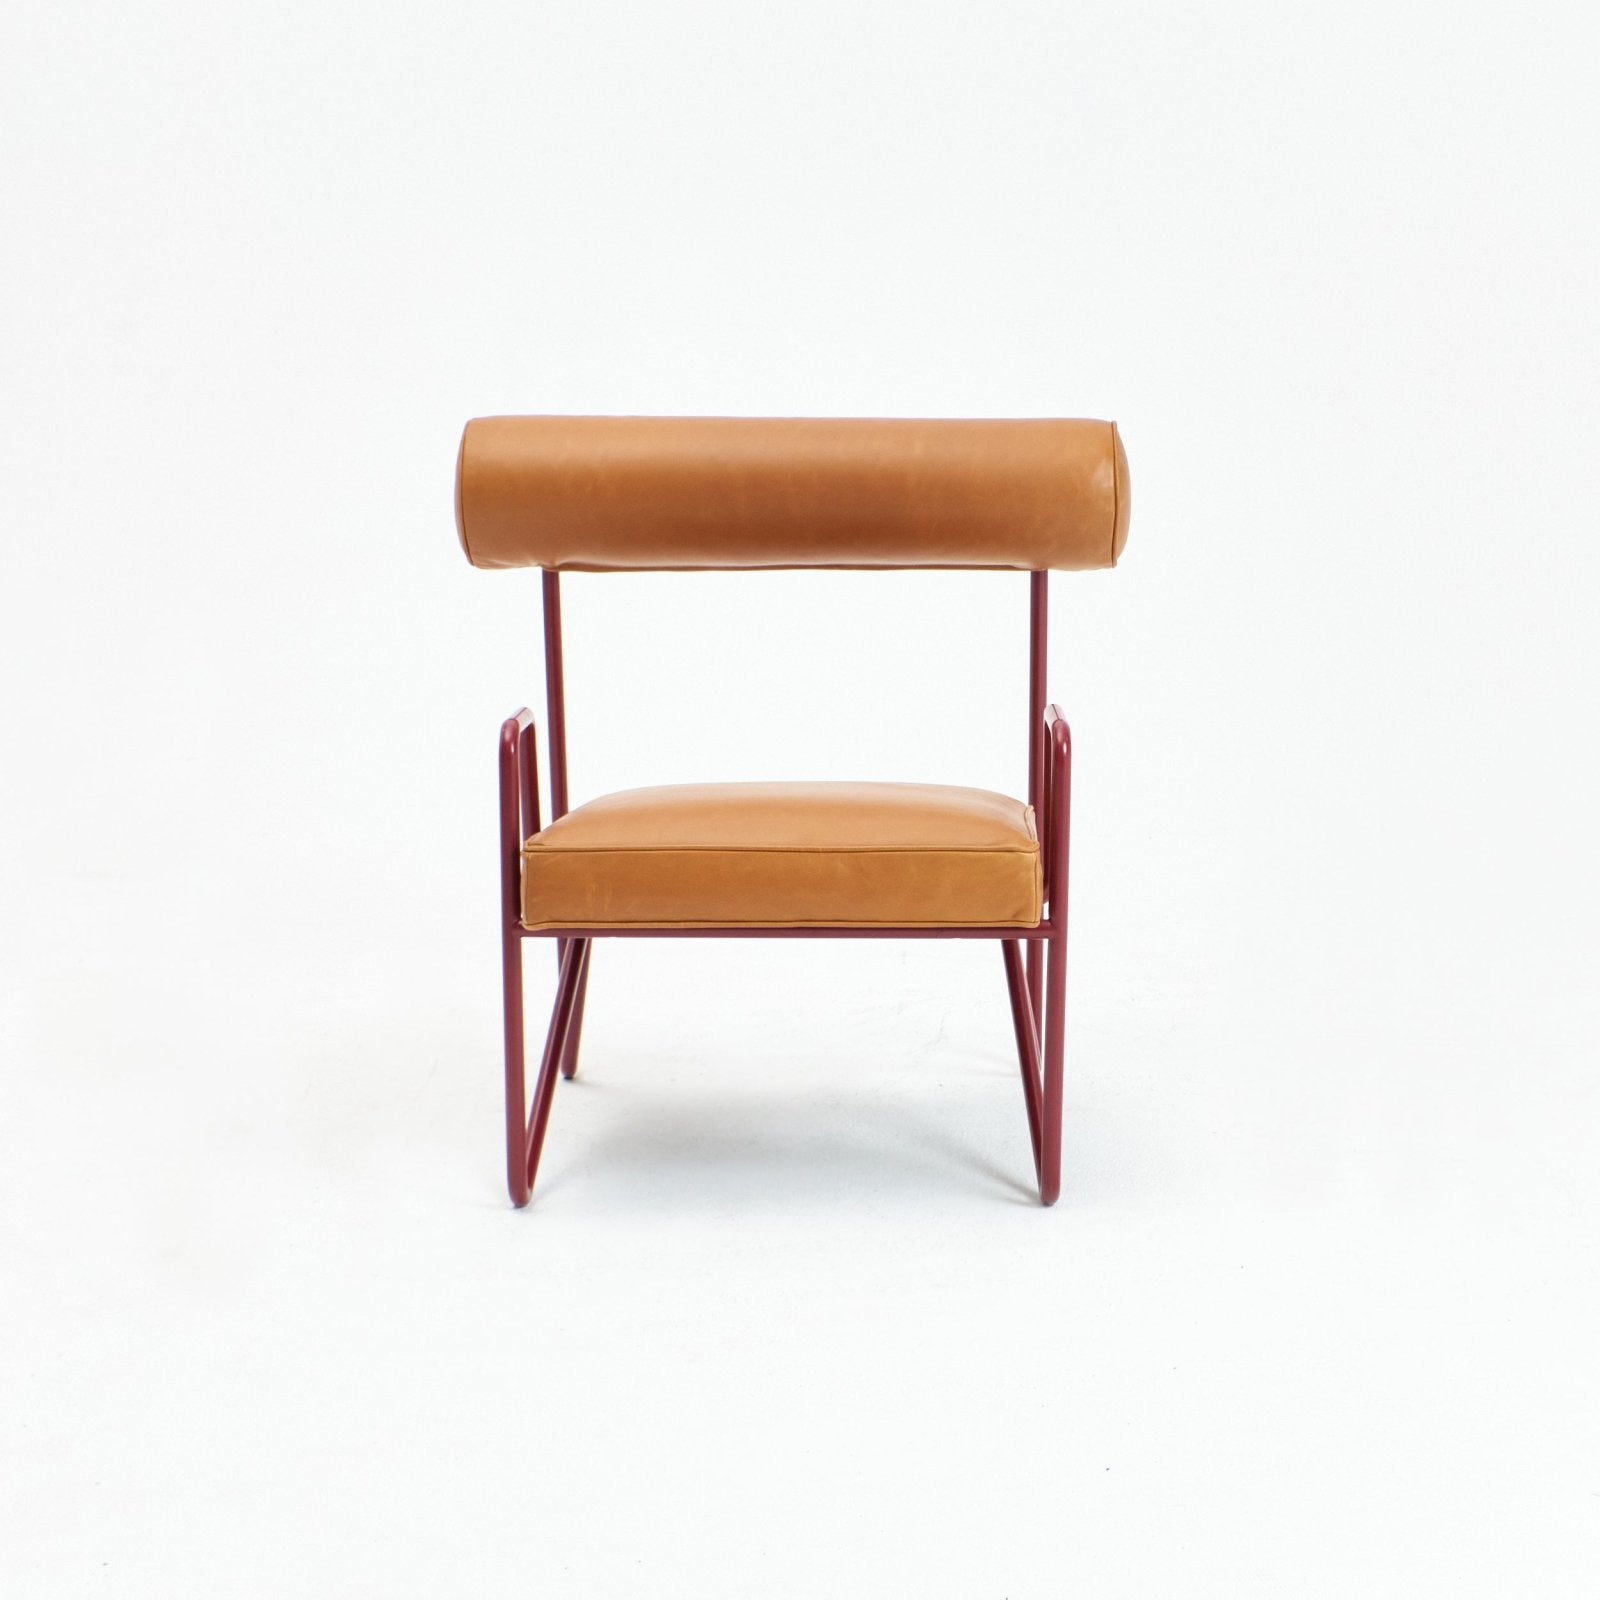 Larry's Lounge Sessel - Hellbraun/Bordeaux Seating von Project 213A